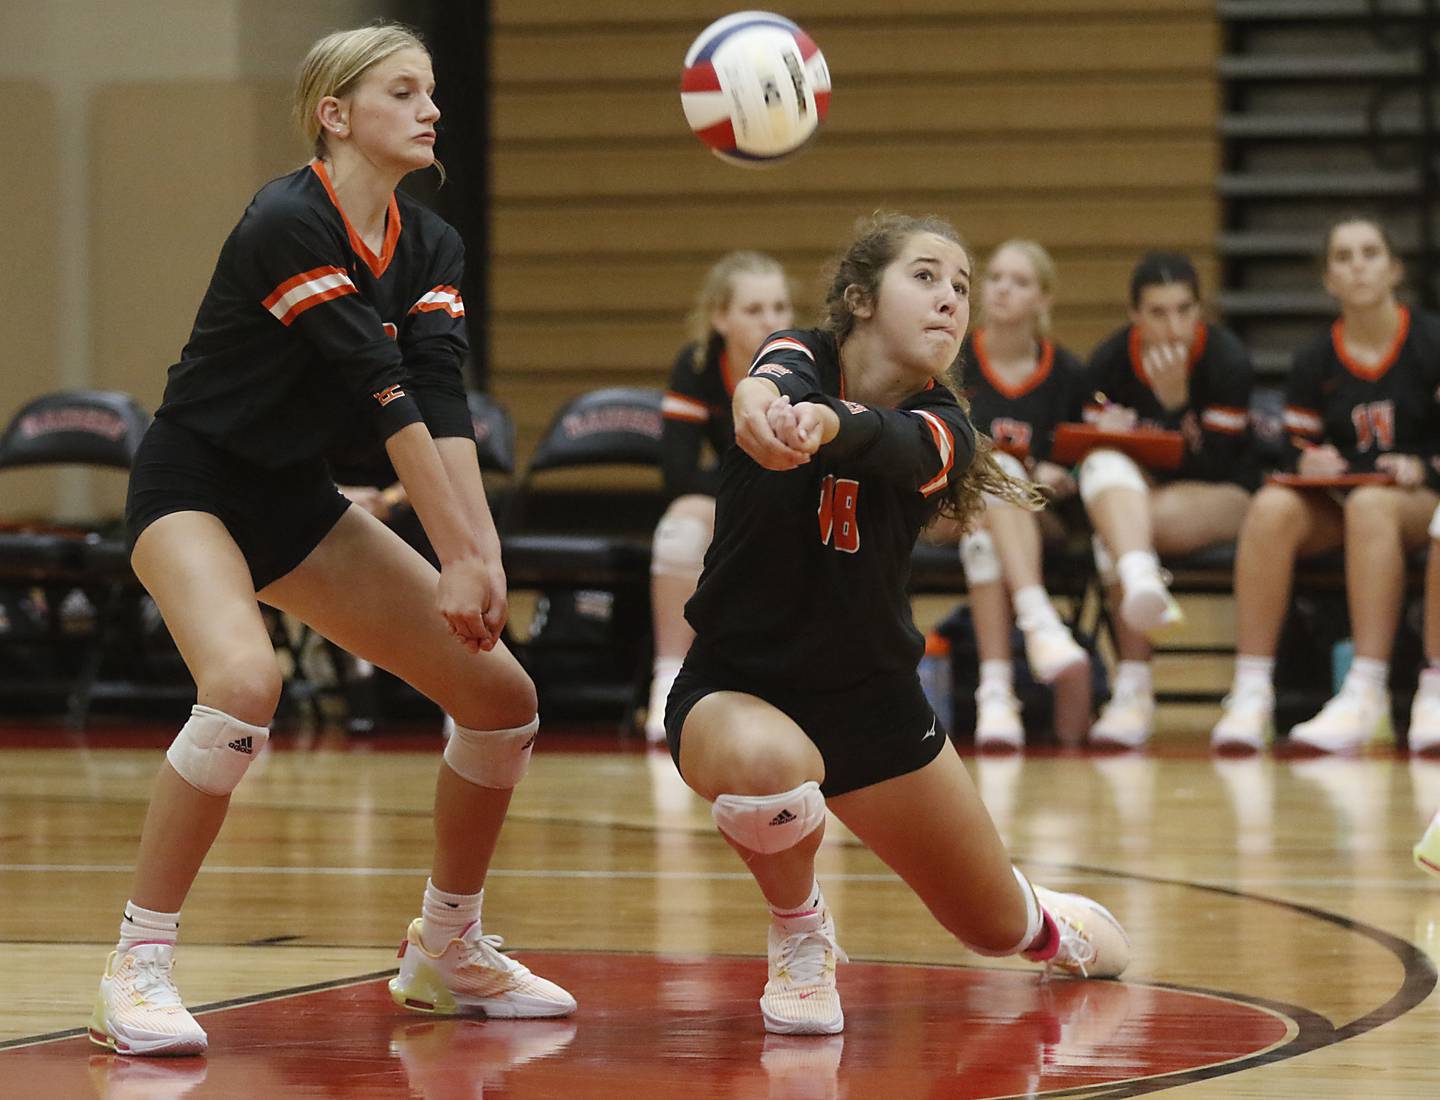 Crystal Lake Central’s Anna Starr tries to dig the ball in front of her teammate, Alexis Hadeler, during a Fox Valley Conference volleyball match against Huntley Tuesday, Aug. 22, 2023, at Huntley High School.